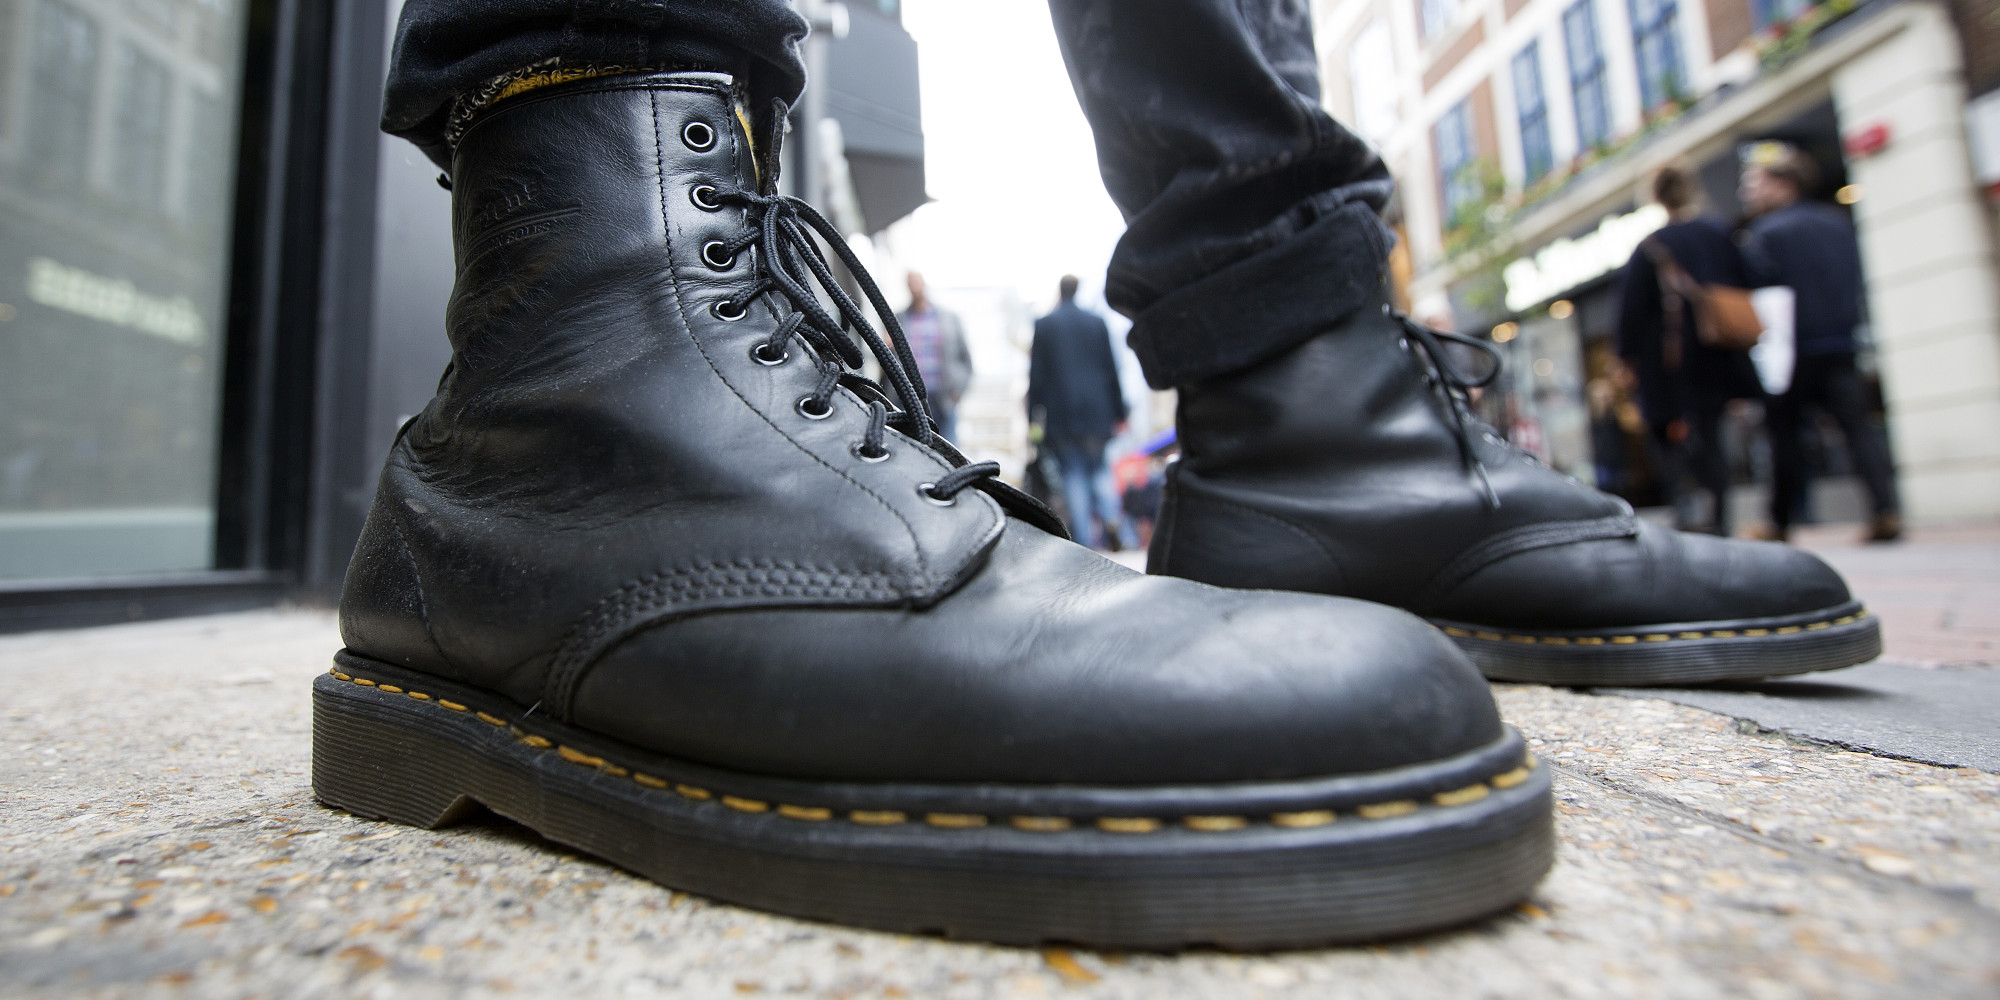 Dr. Martens Sold: Iconic Punk Boot-Maker Bought By Investors